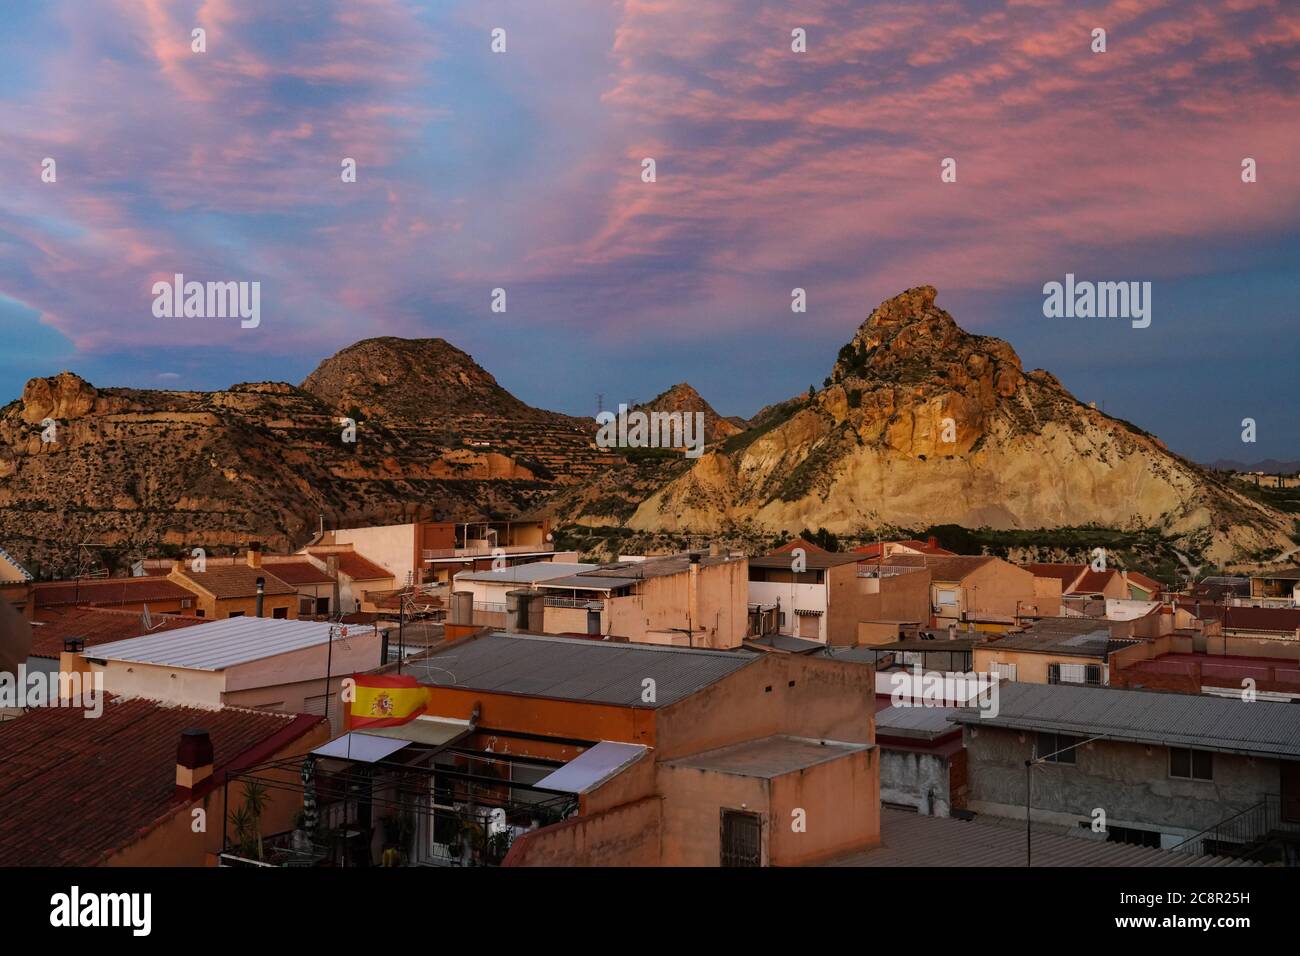 Sunset view of Archena with its mountains in Balneario de Archena, Murcia region of Spain. Stock Photo